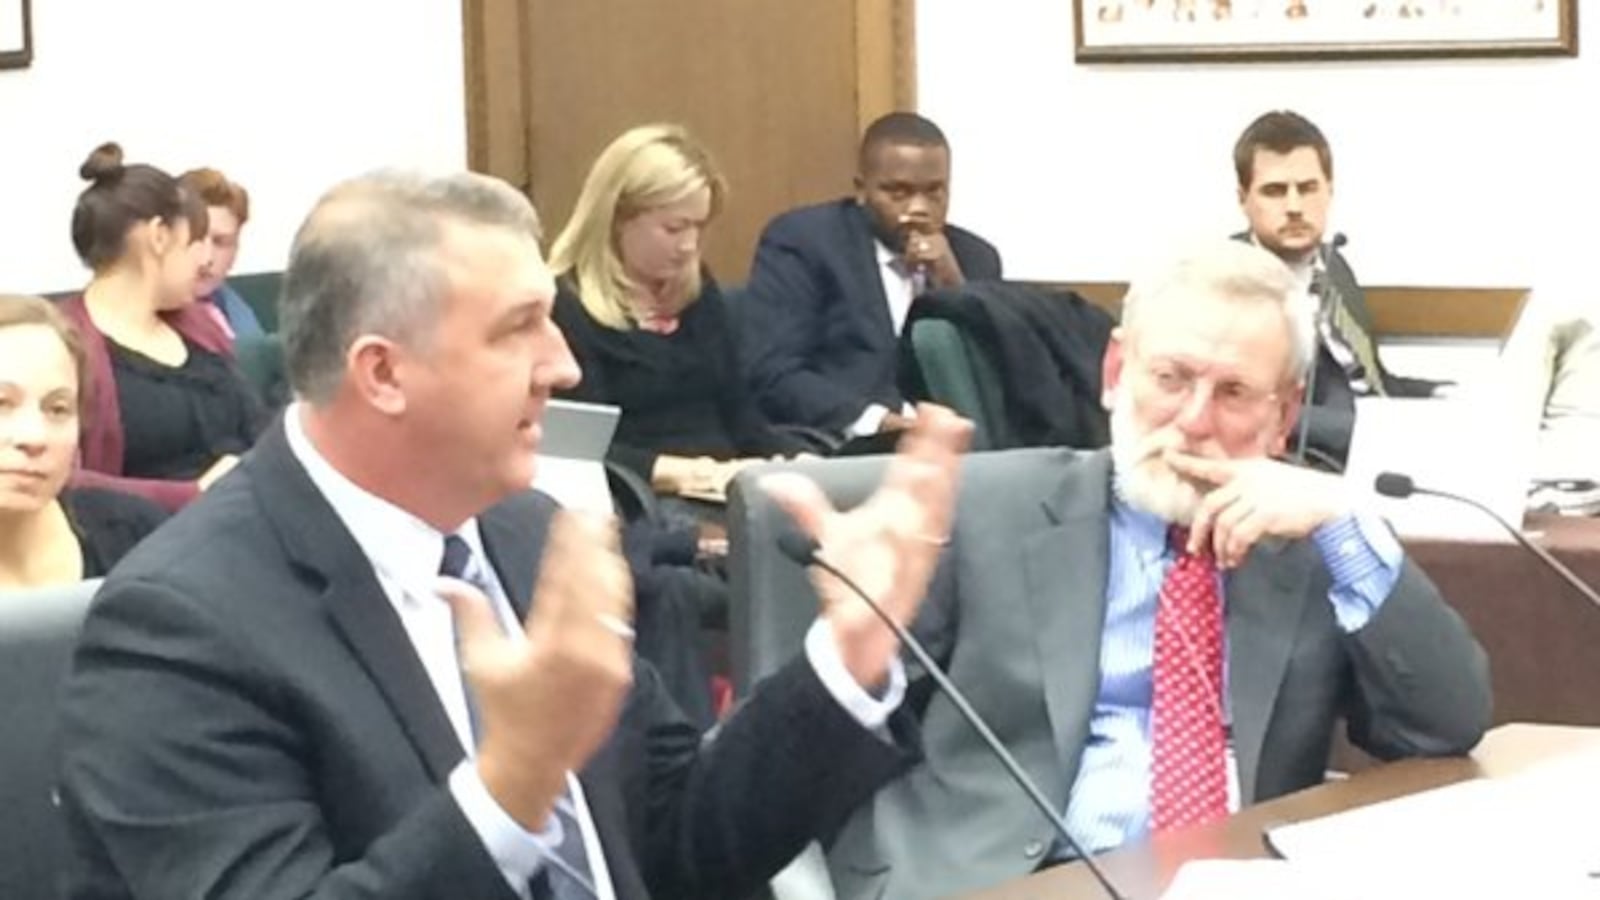 Richard Crandall (left) makes a cameo appearance before the state's joint education committee (Todd Engdahl/Chalkbeat).